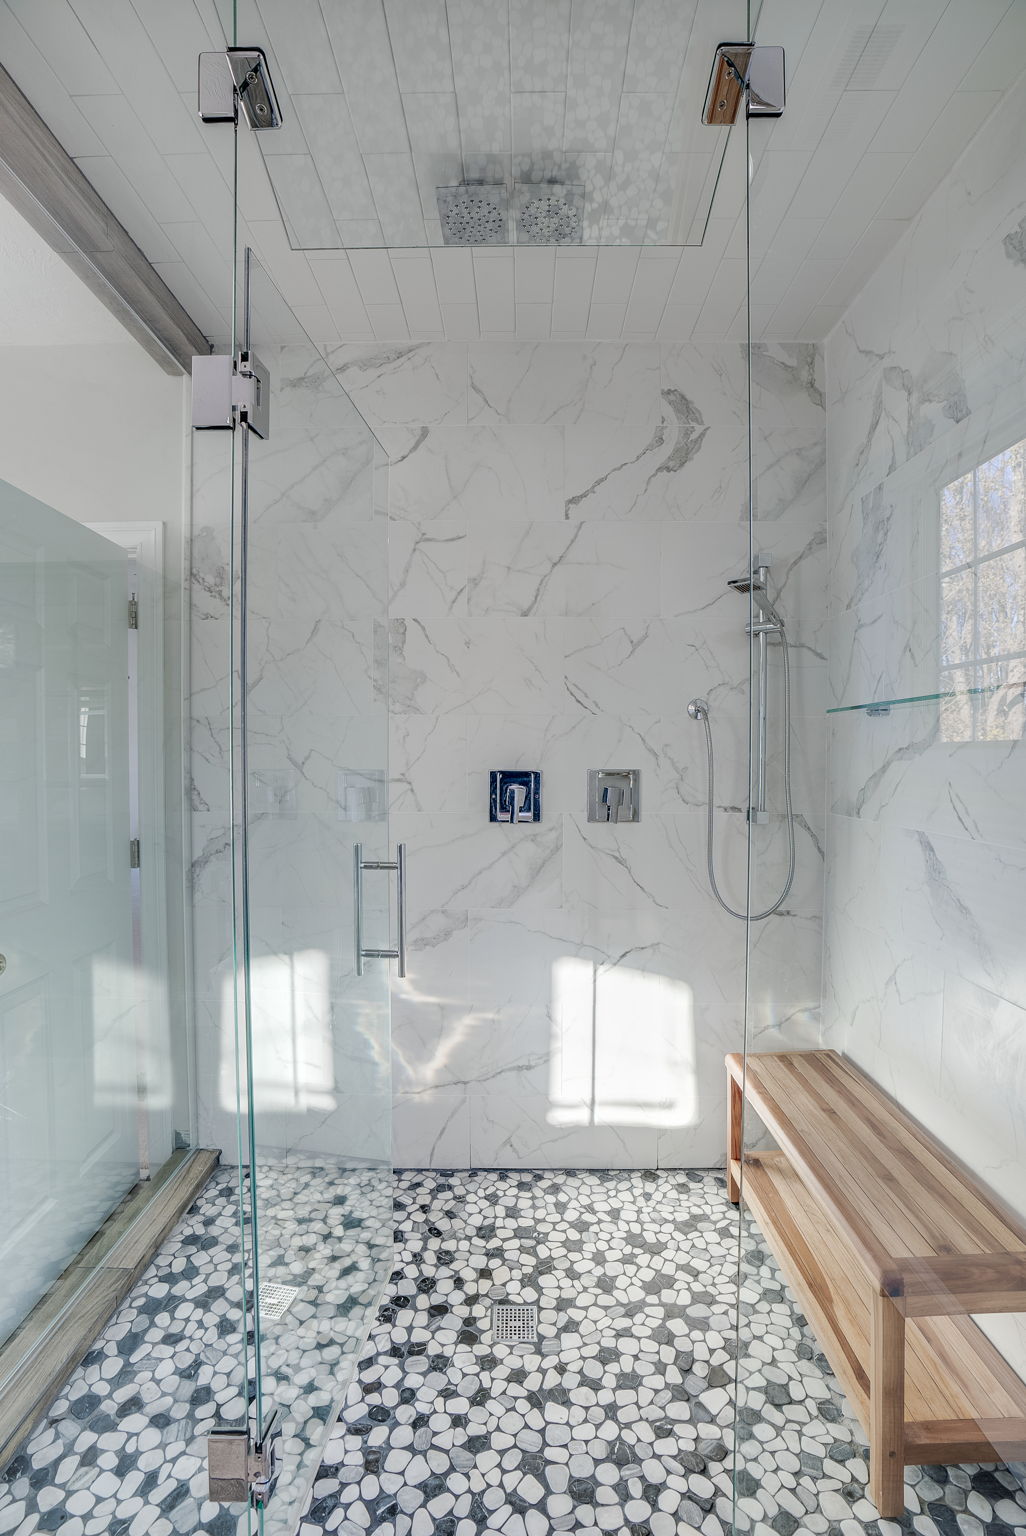 Walk-in steam shower, luxury shower head and fixtures, and natural stone floor